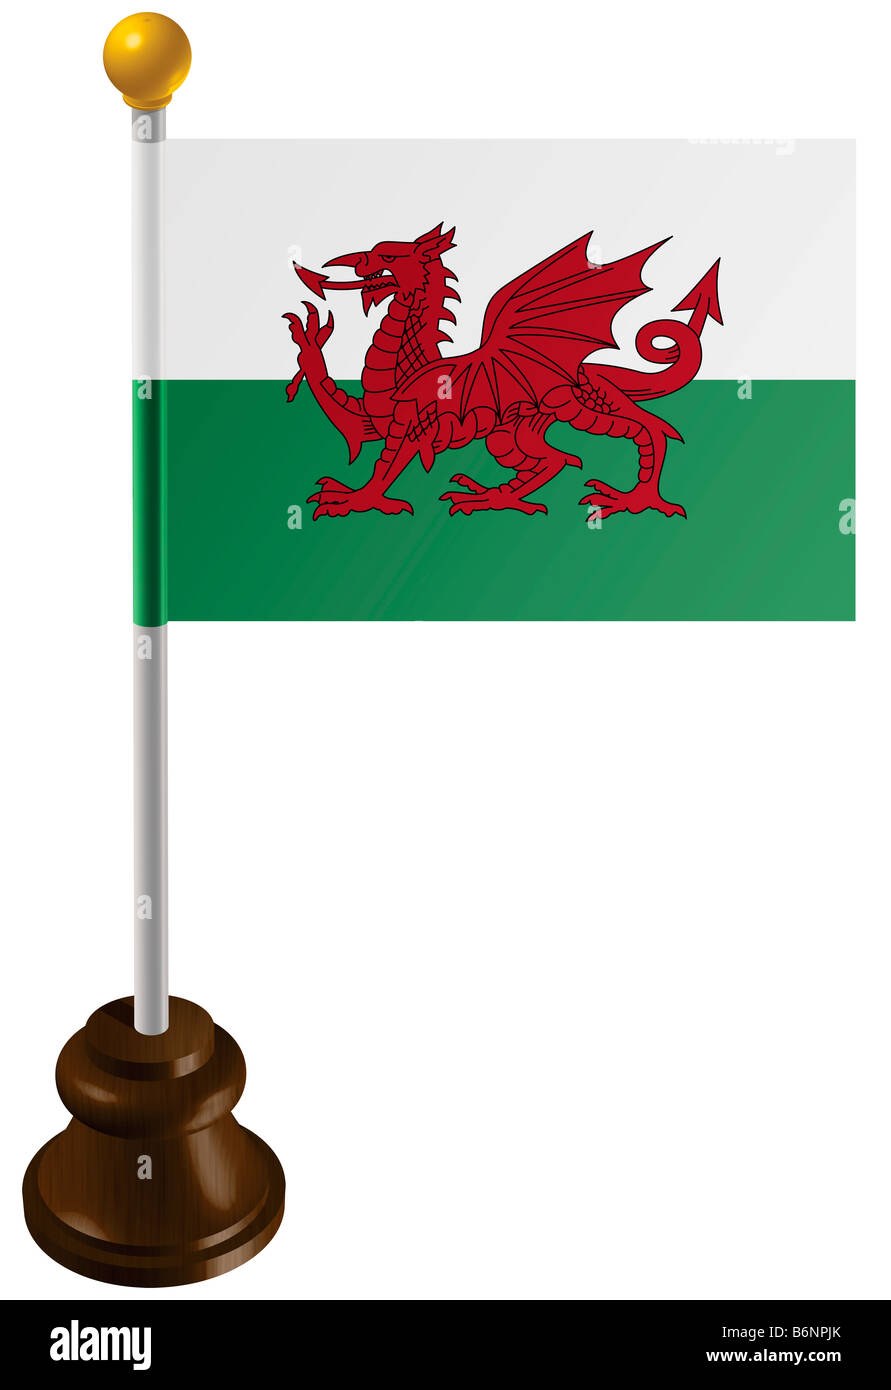 Wales flag as a marker Stock Photo